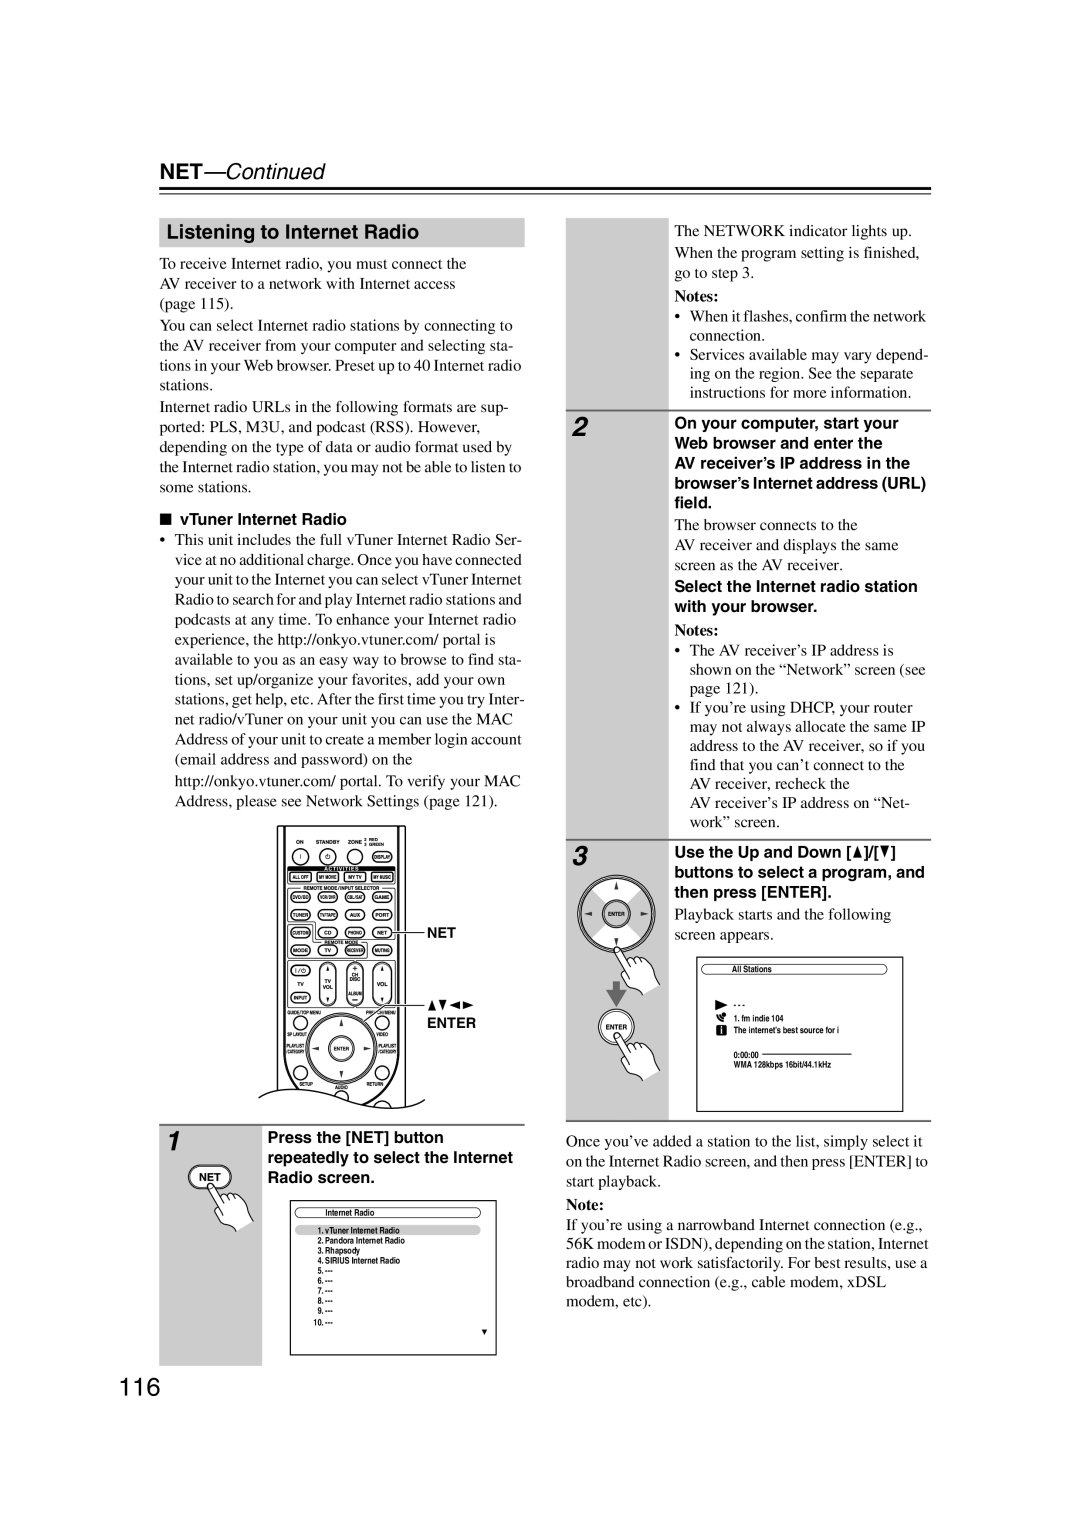 Onkyo TX-NR1007 instruction manual NET—Continued, Listening to Internet Radio, Notes 